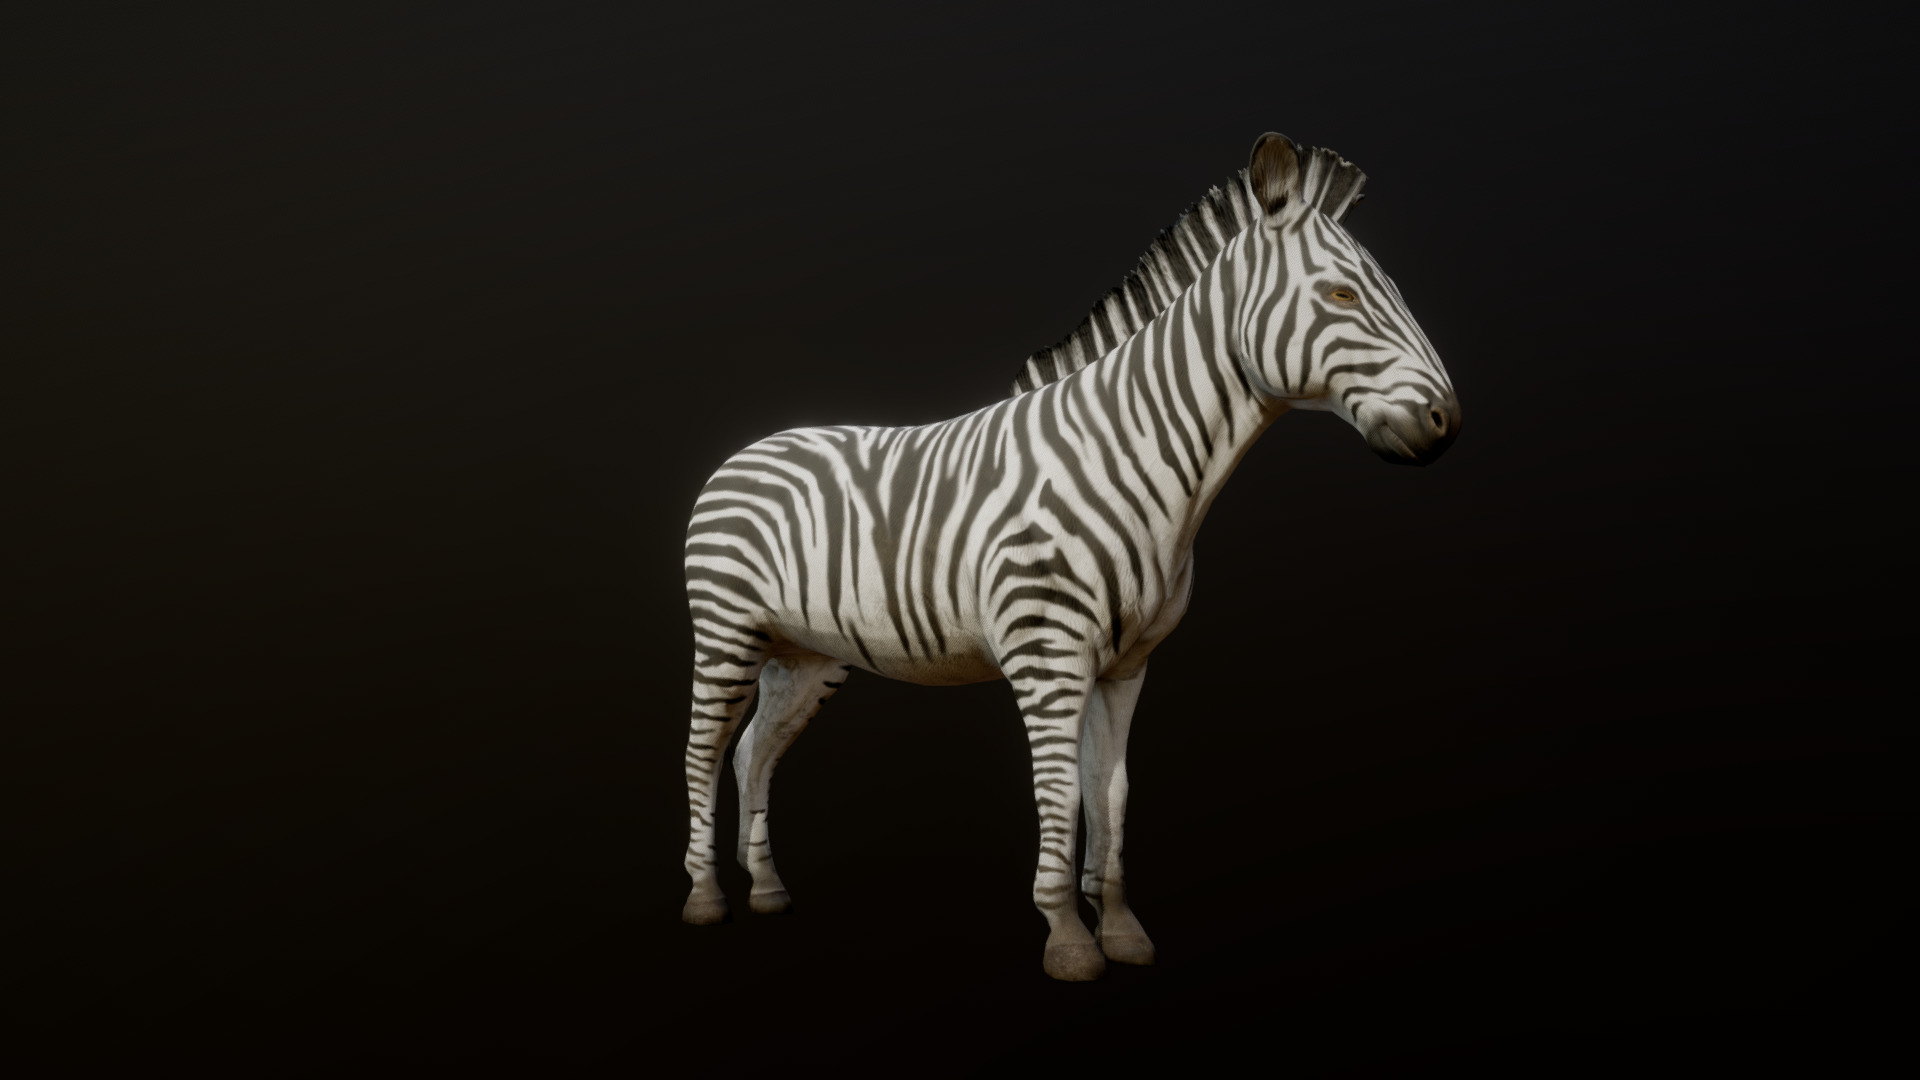 3D model ZEBRA ANIMATIONS - This is a 3D model of the ZEBRA ANIMATIONS. The 3D model is about a zebra standing on a black background.